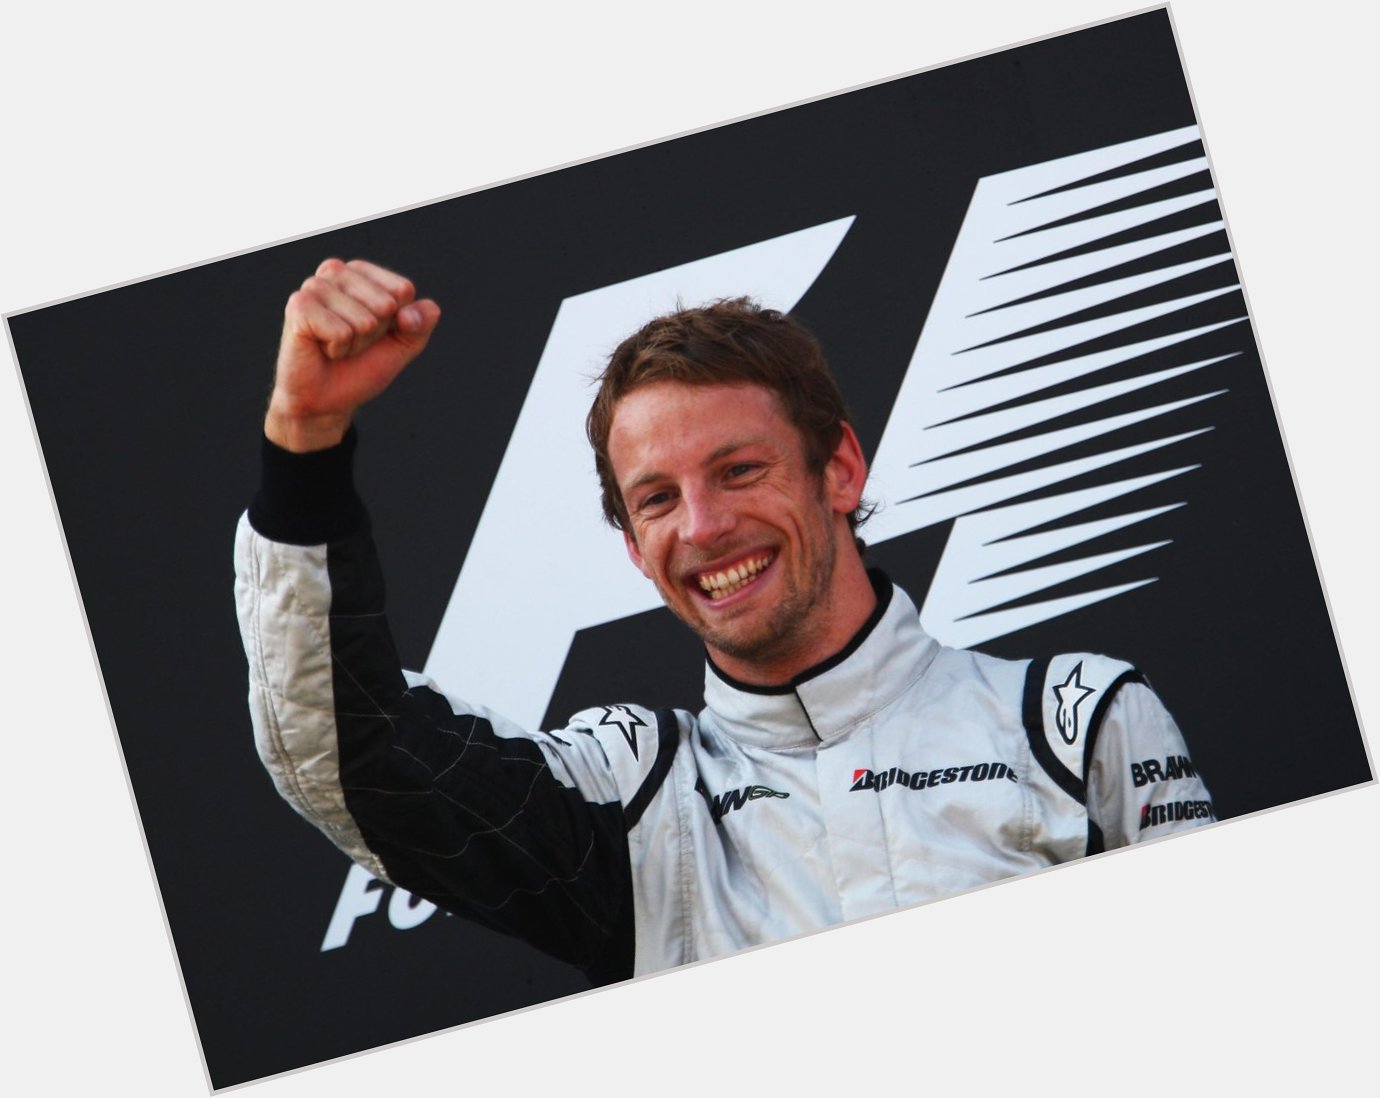 Happy birthday to my favourite f1 driver of all time, Jenson Button <33 